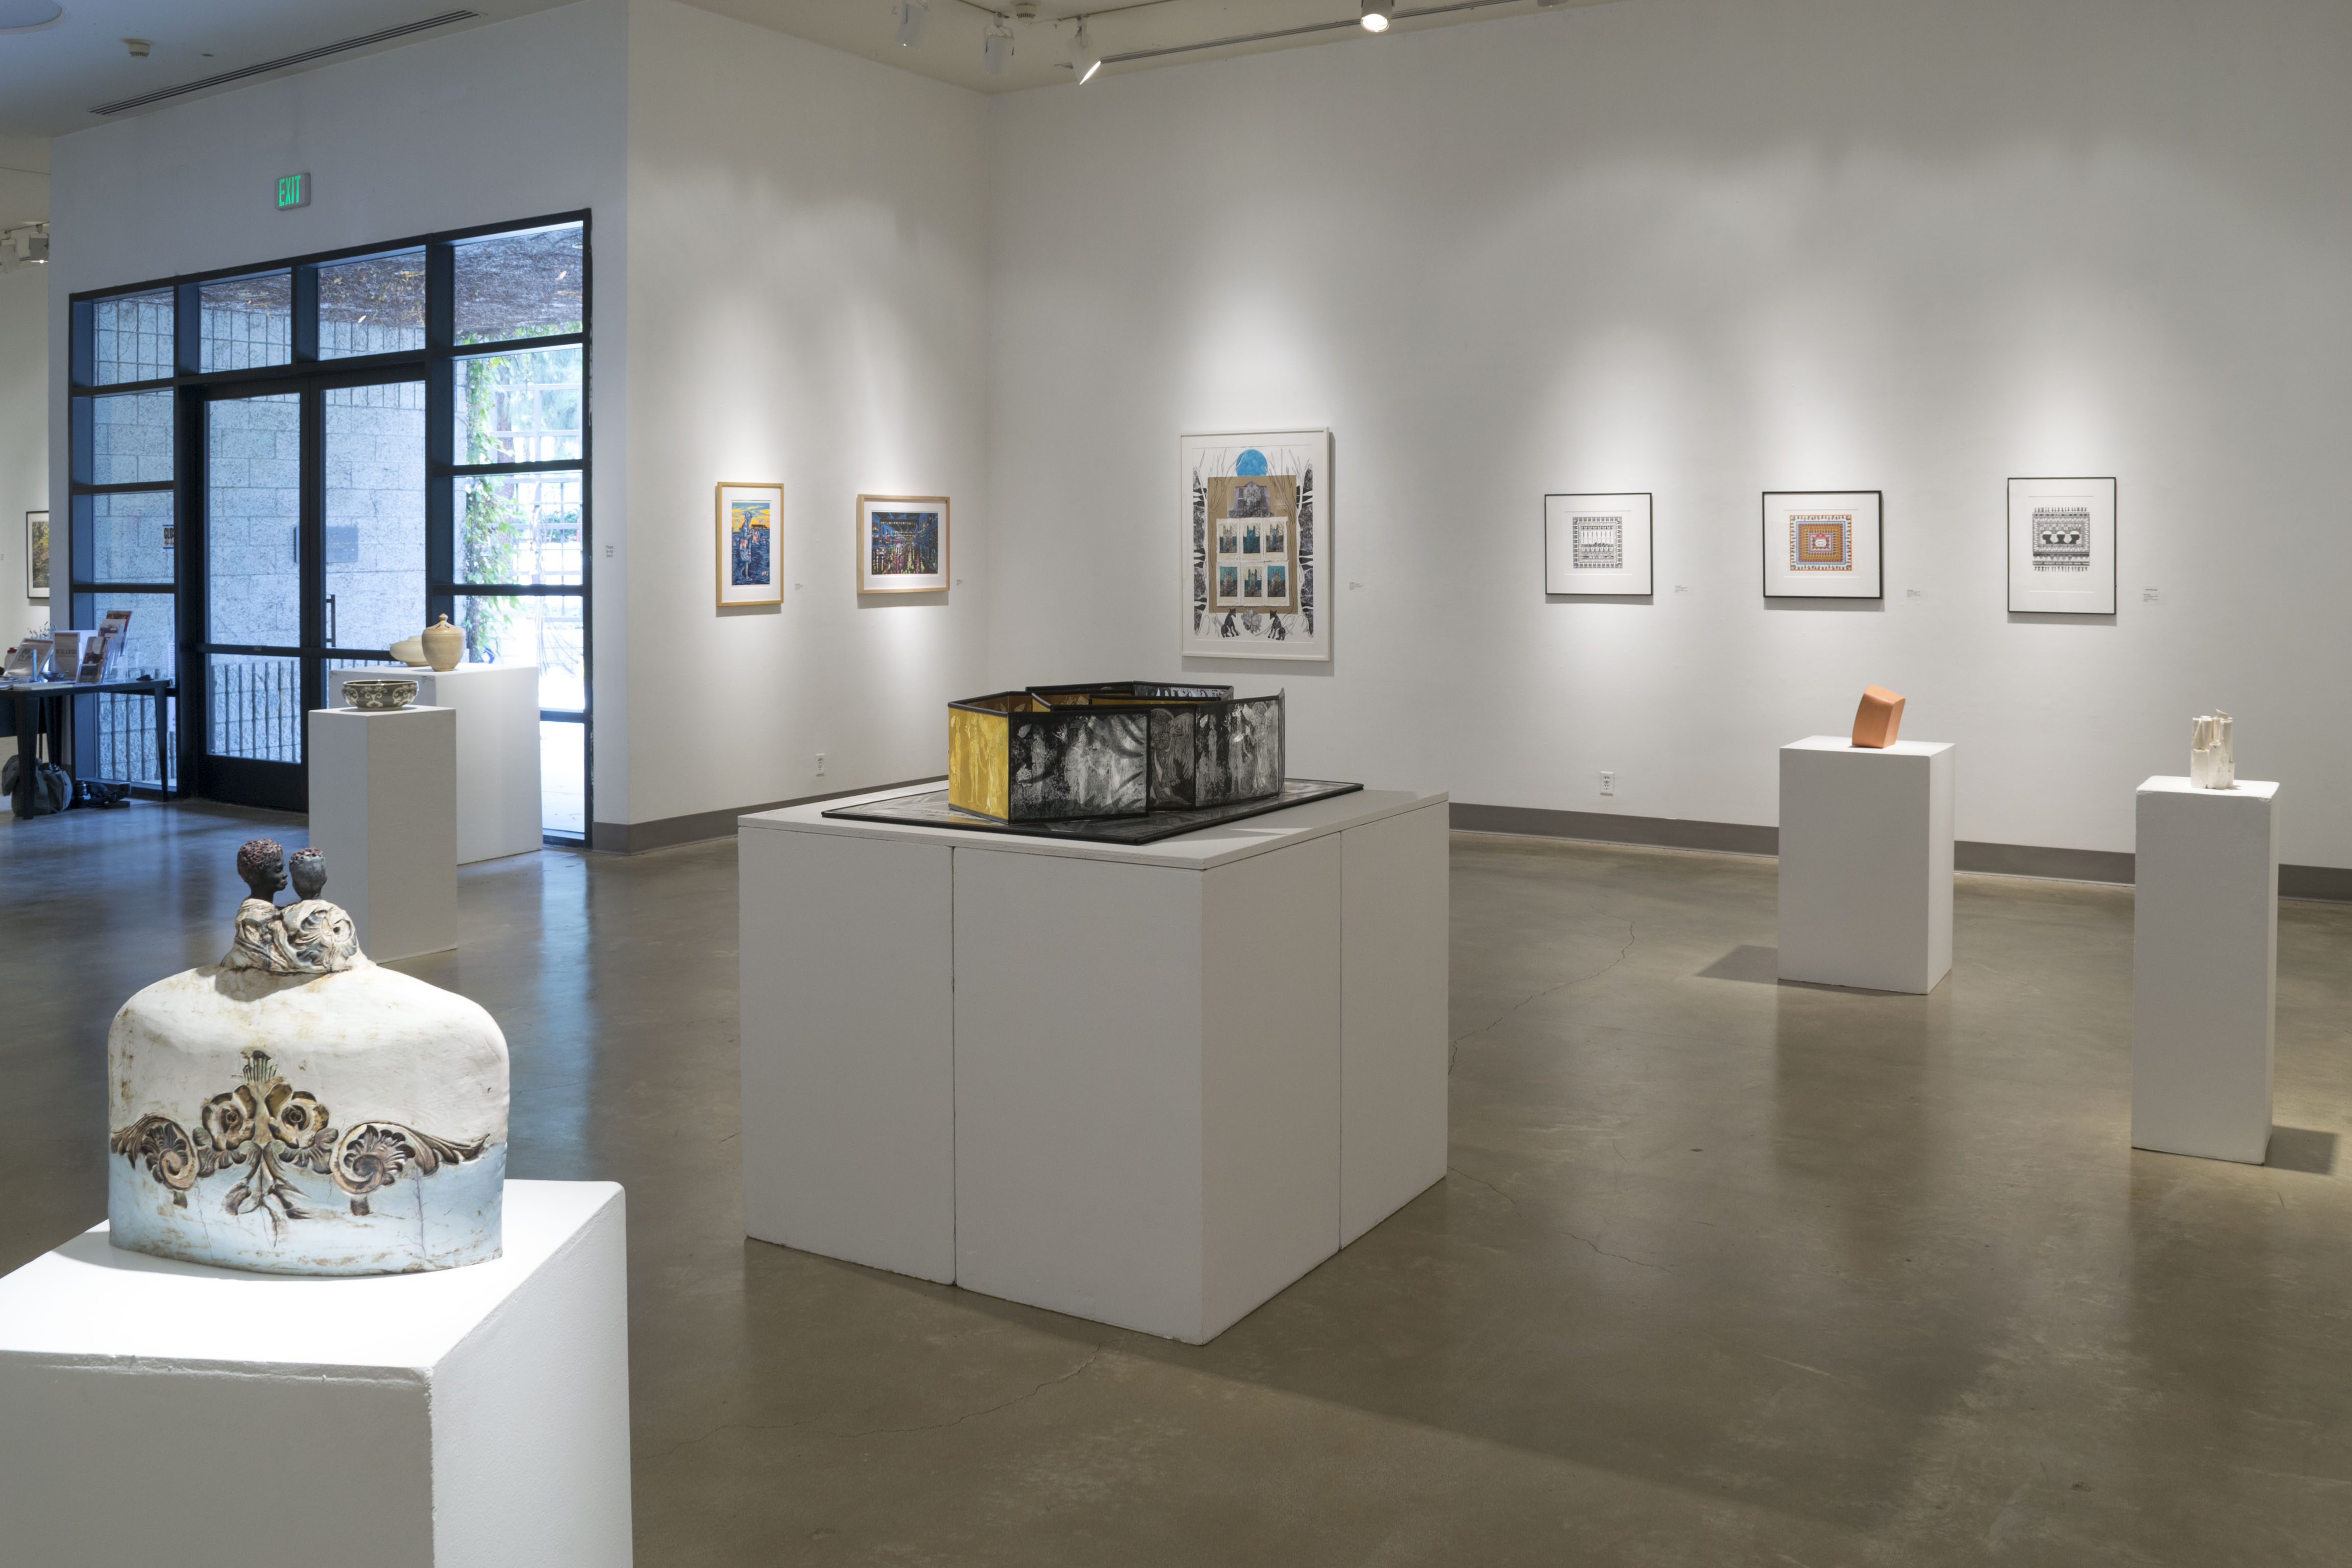 Installation View, Front East Gallery, Ink & Clay 40 Exhibition, Sept. 13, 2014 to Oct. 23, 2014.